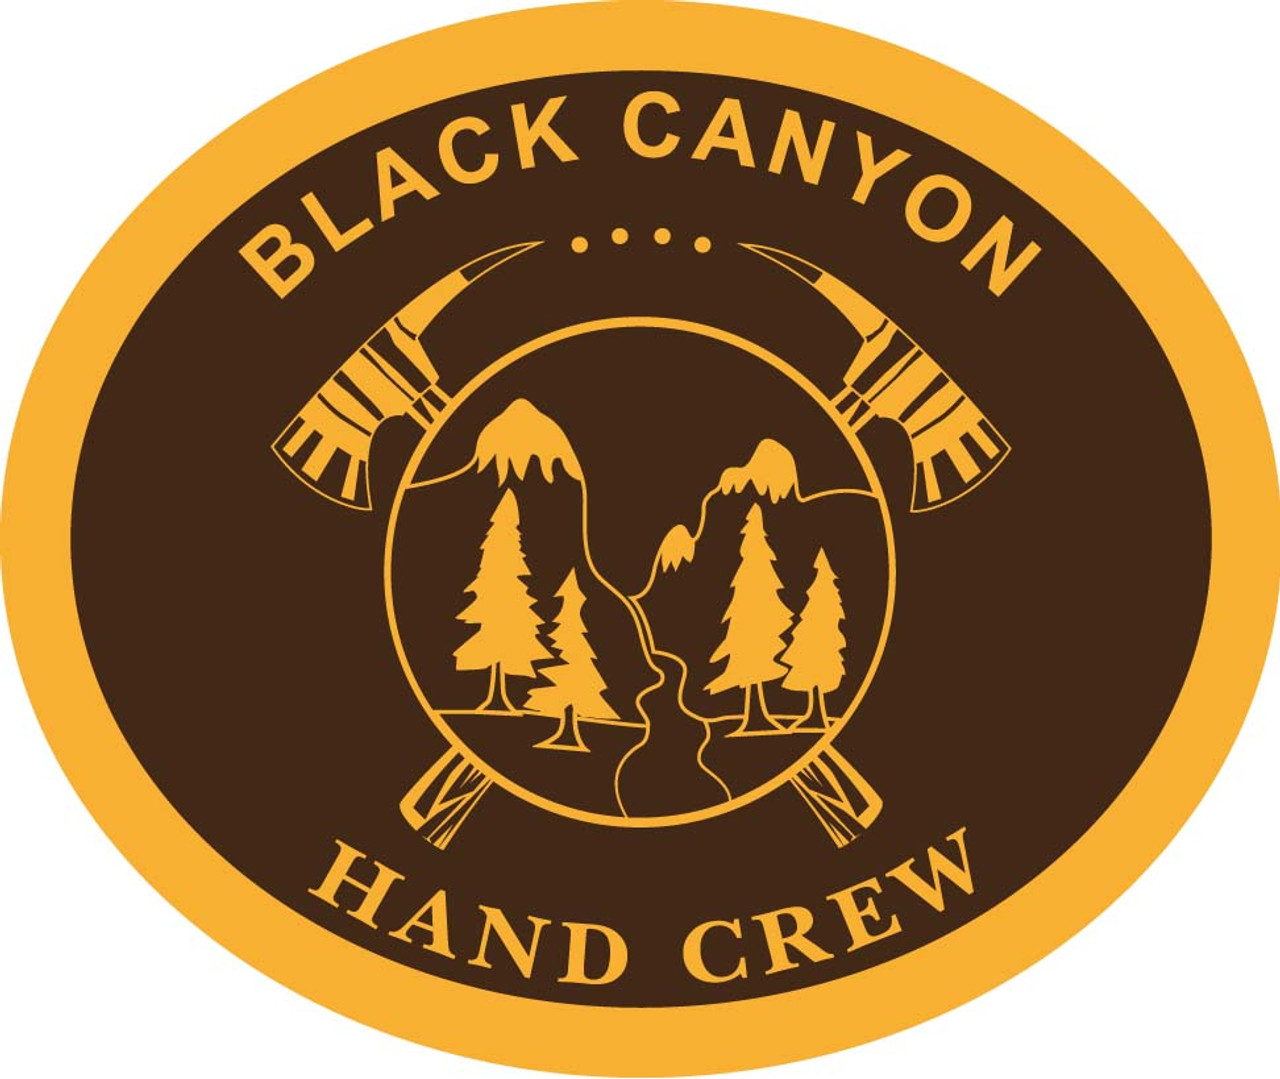 Black Canyon Hand Crew Buckle (RESTRICTED)